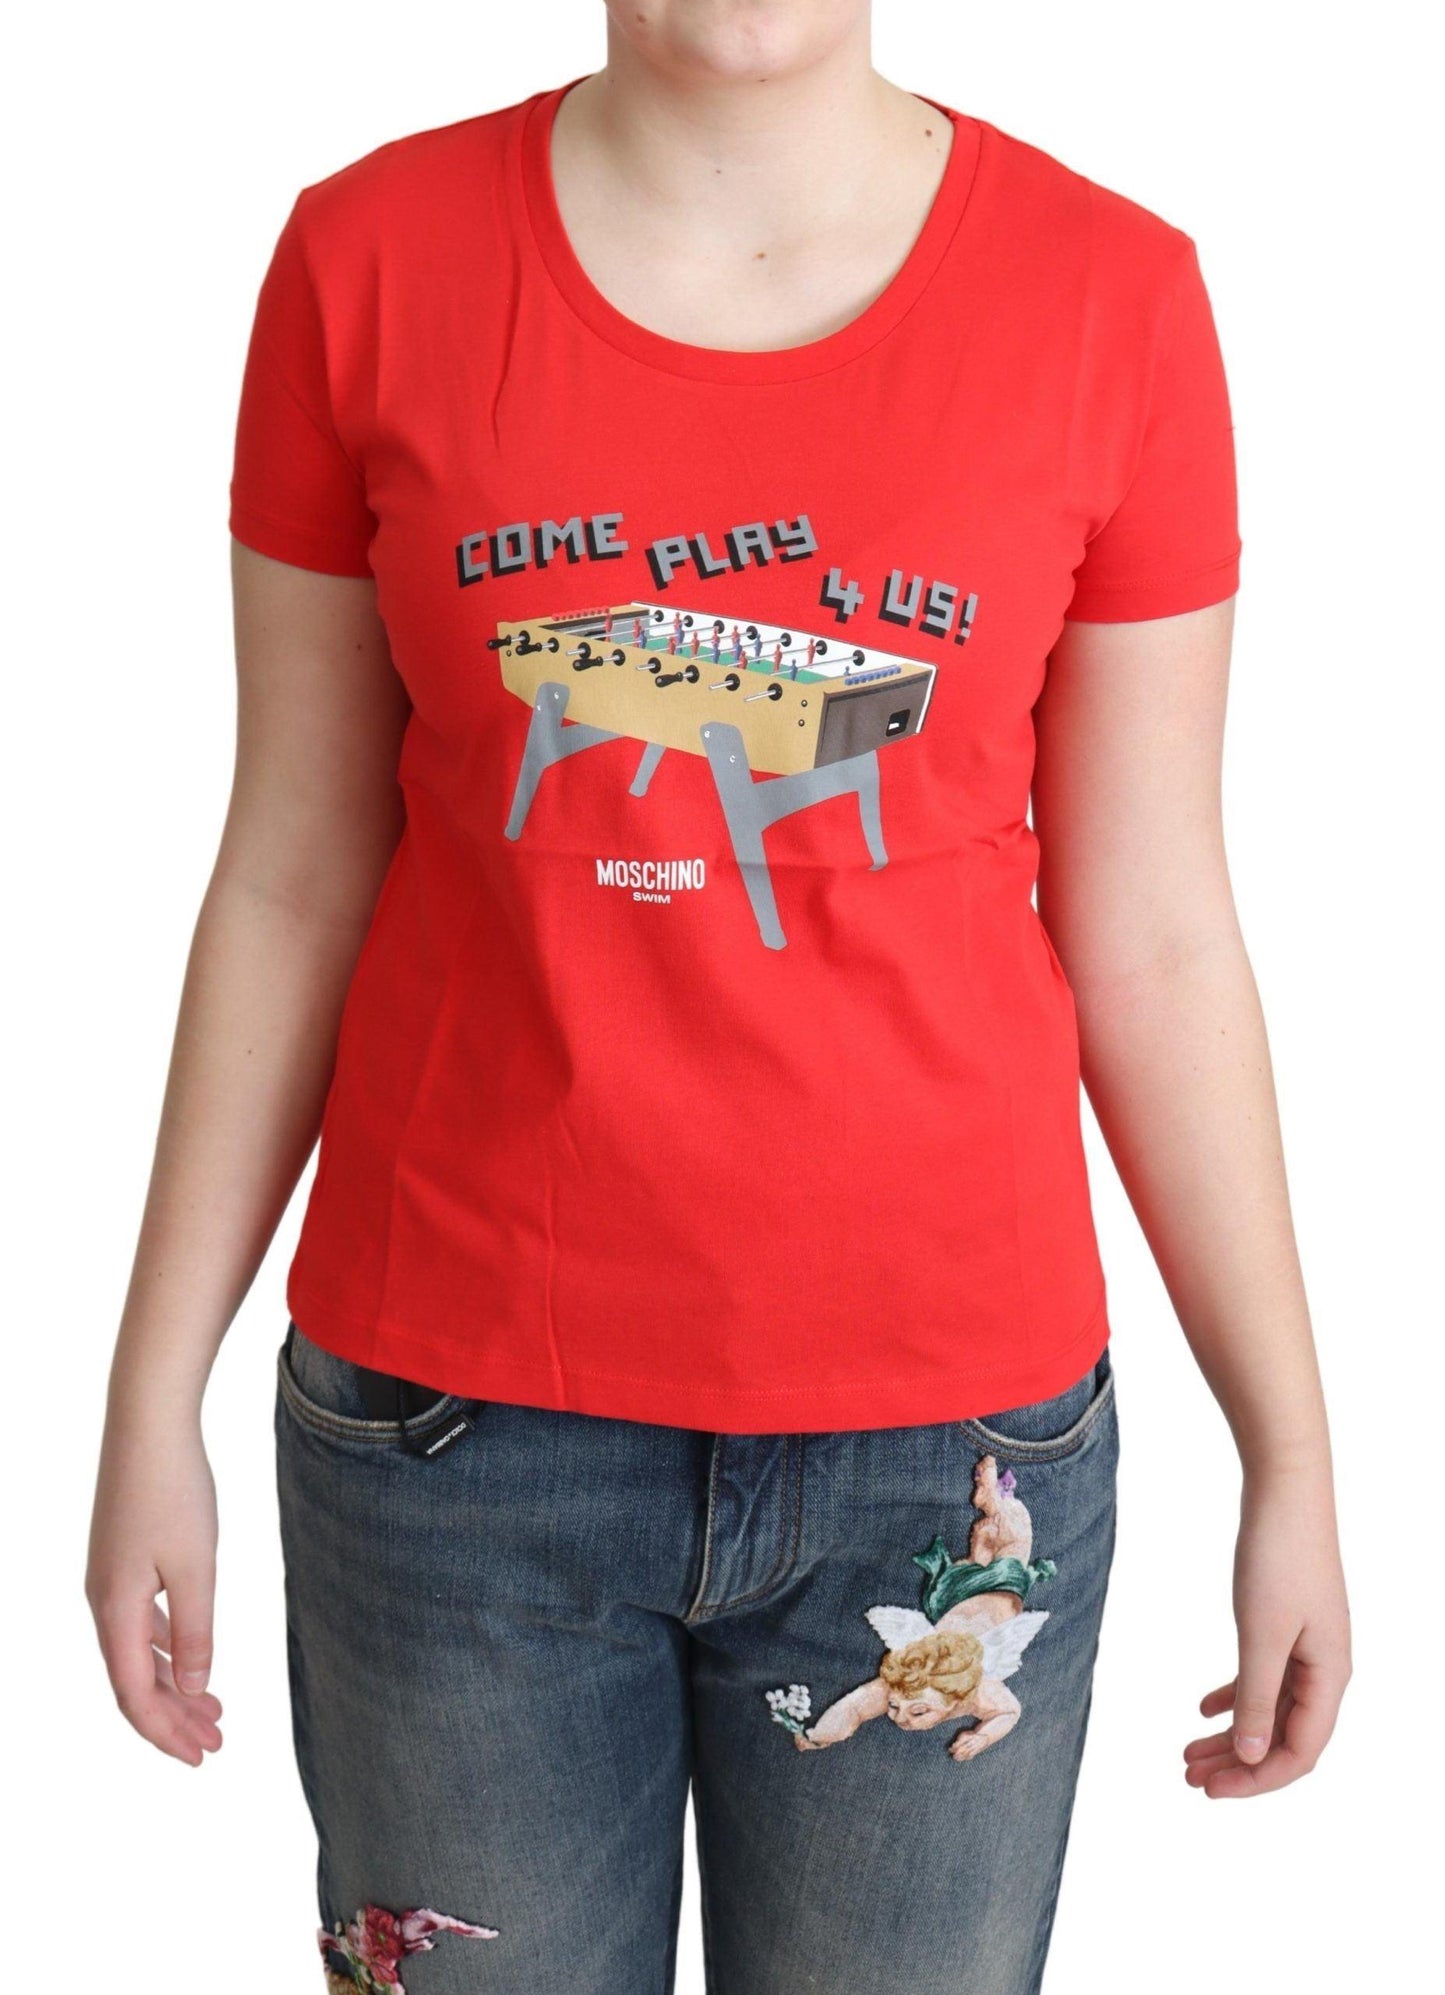 Moschino Chic Red Cotton Tee with Playful Print - PER.FASHION